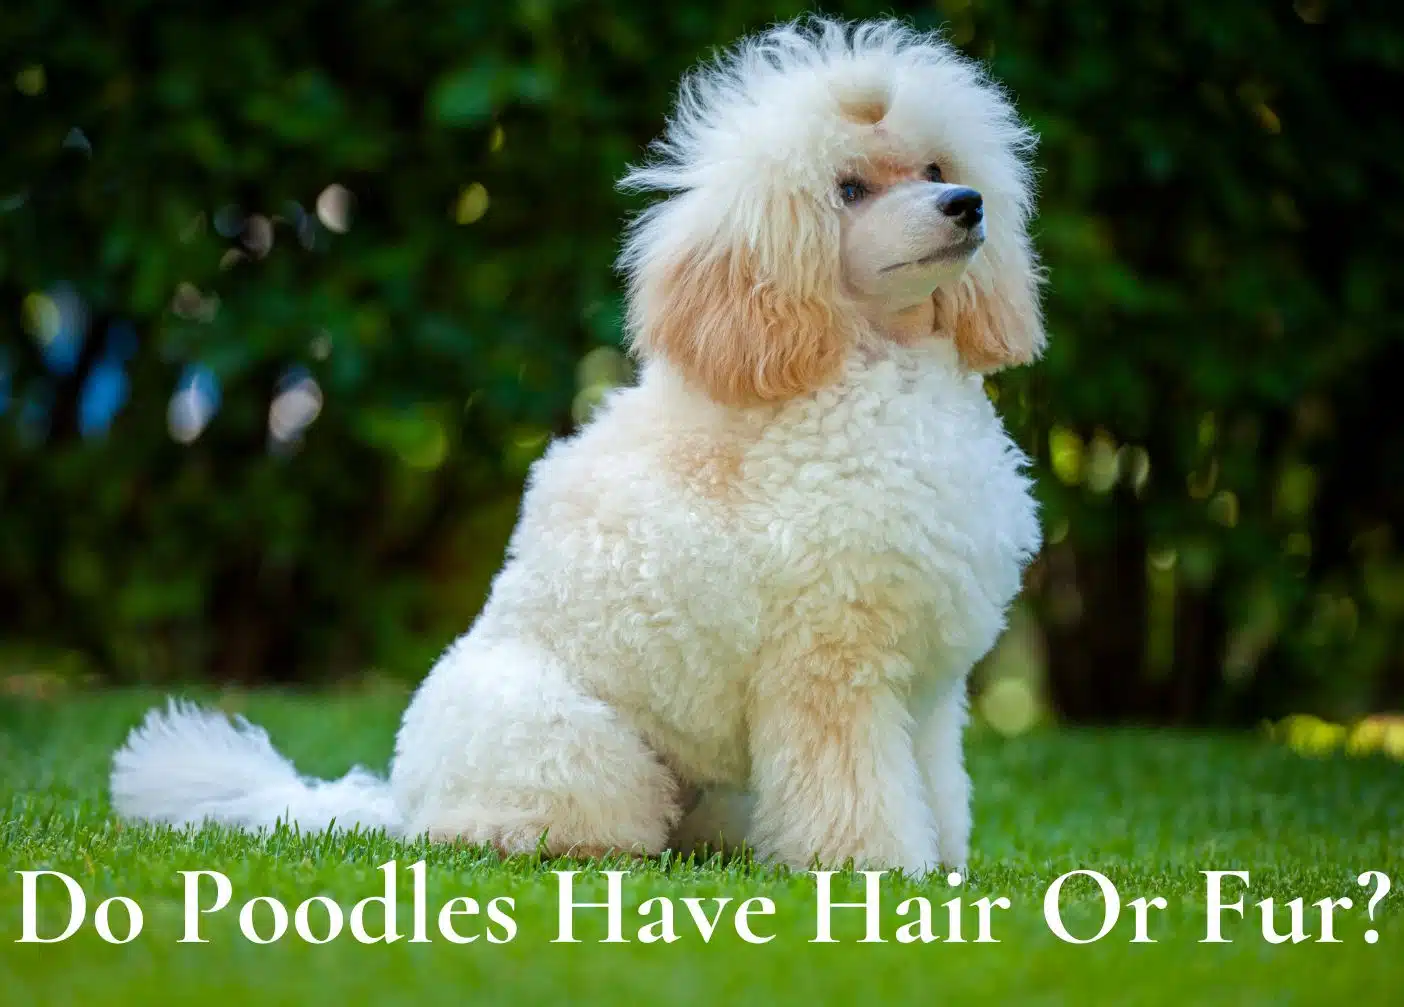 a white poodle posing for a picture on grass | do poodles have hair or fur?